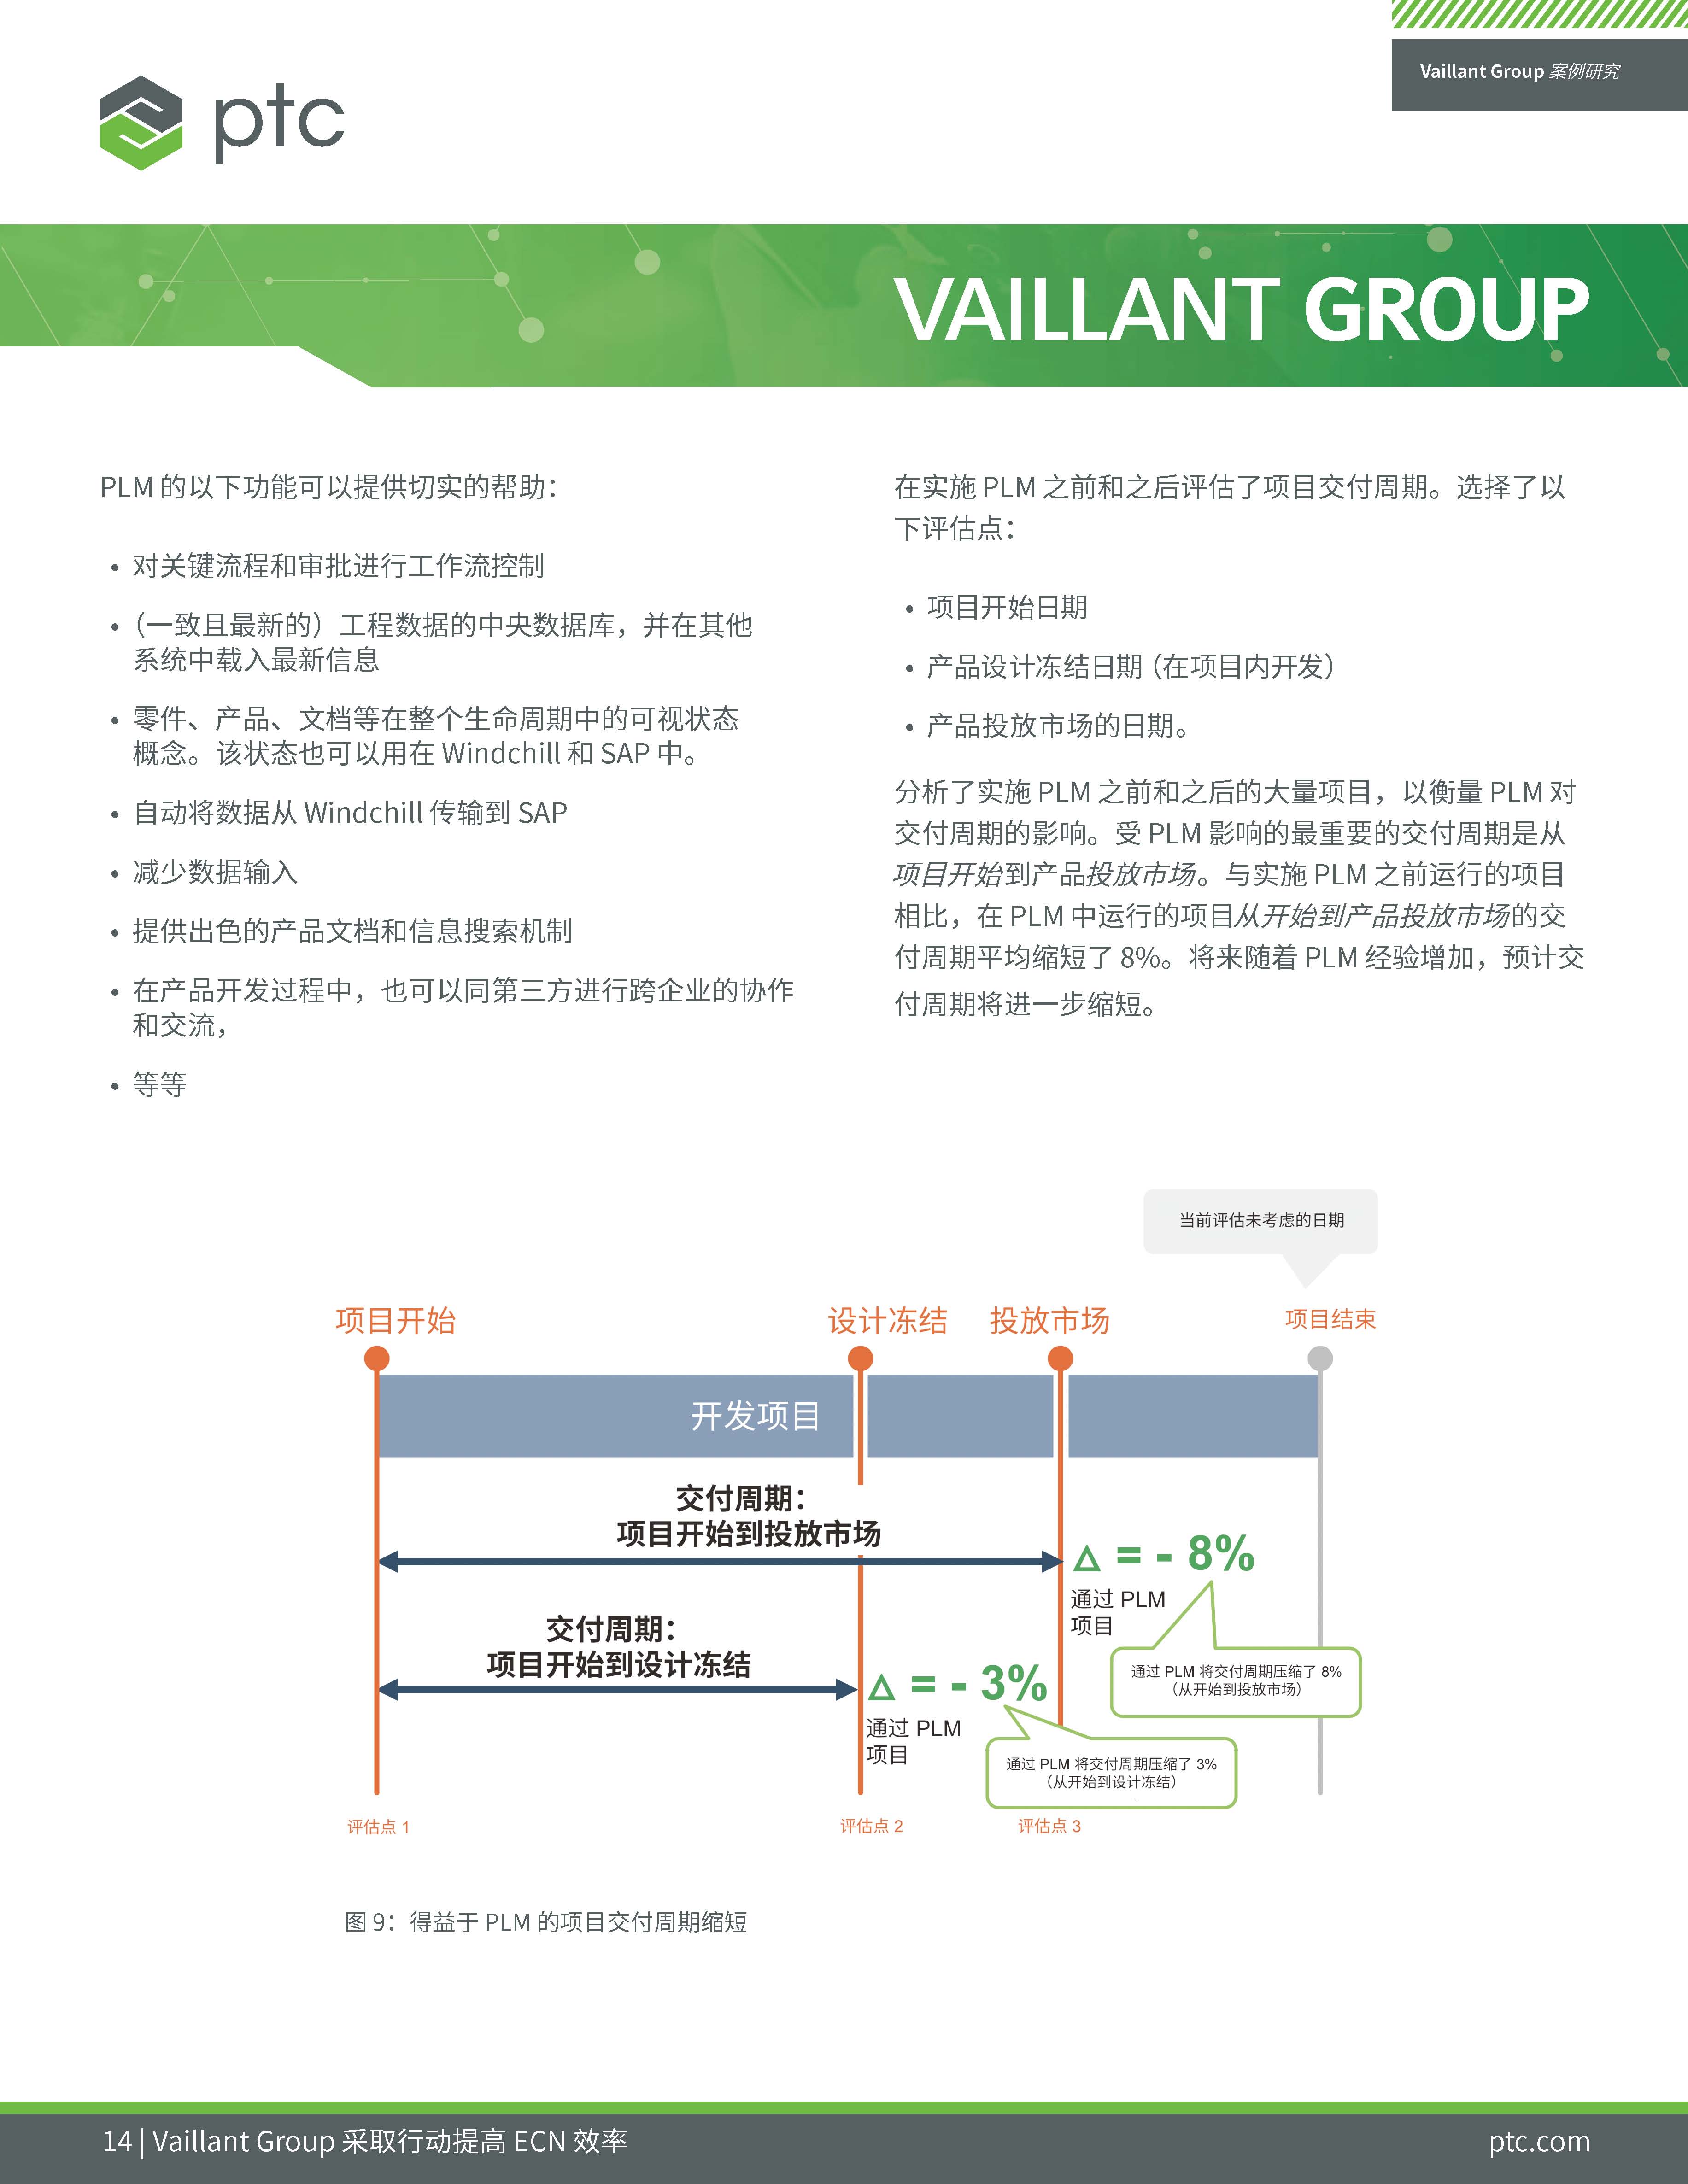 Vaillant Group's Digital Transformation (Chinese)_页面_14.jpg